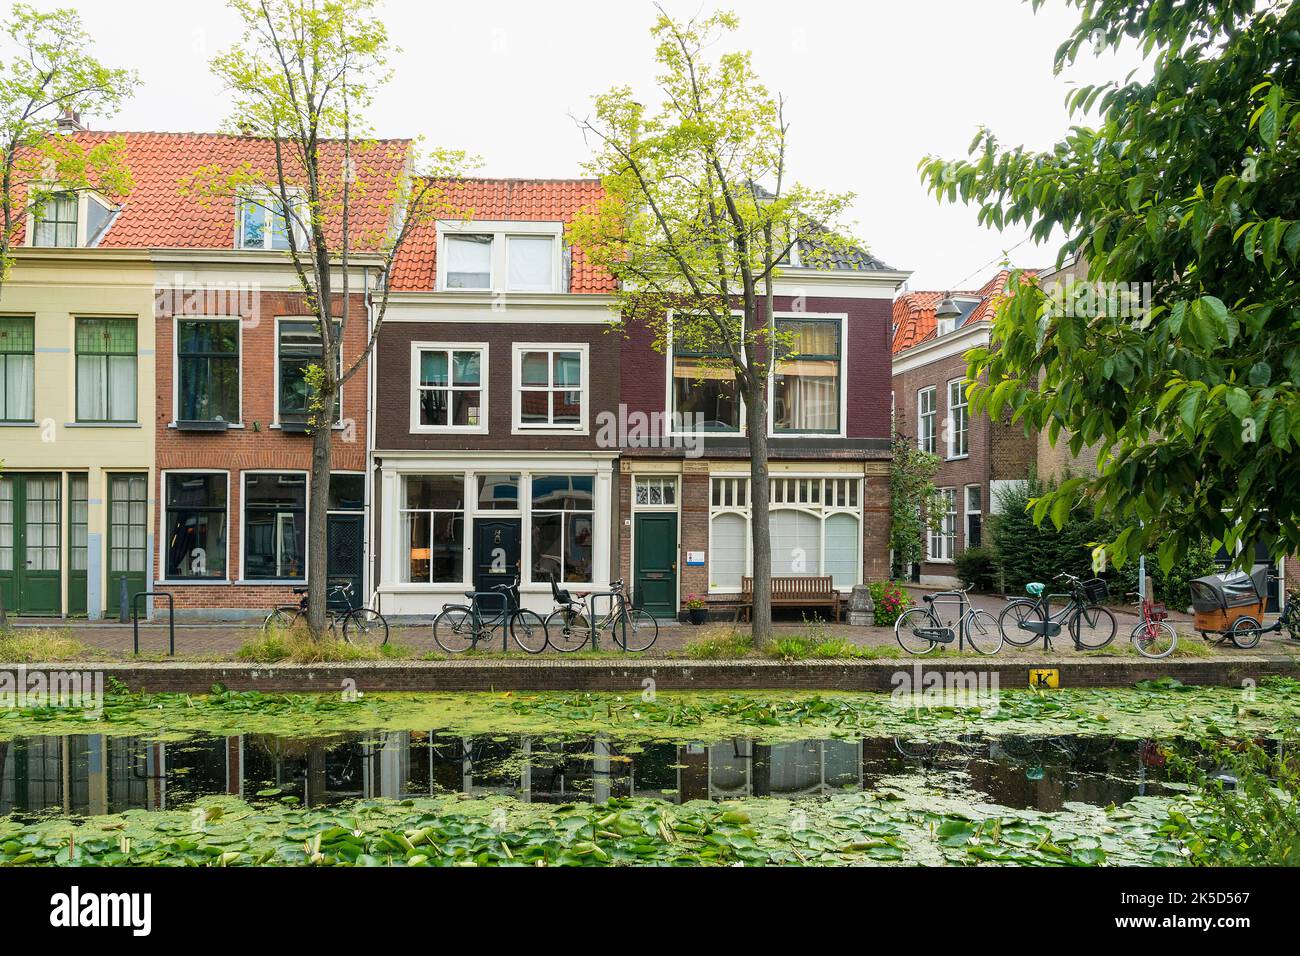 Delft (Netherlands), historical old town, achterom, canal, residential houses Stock Photo